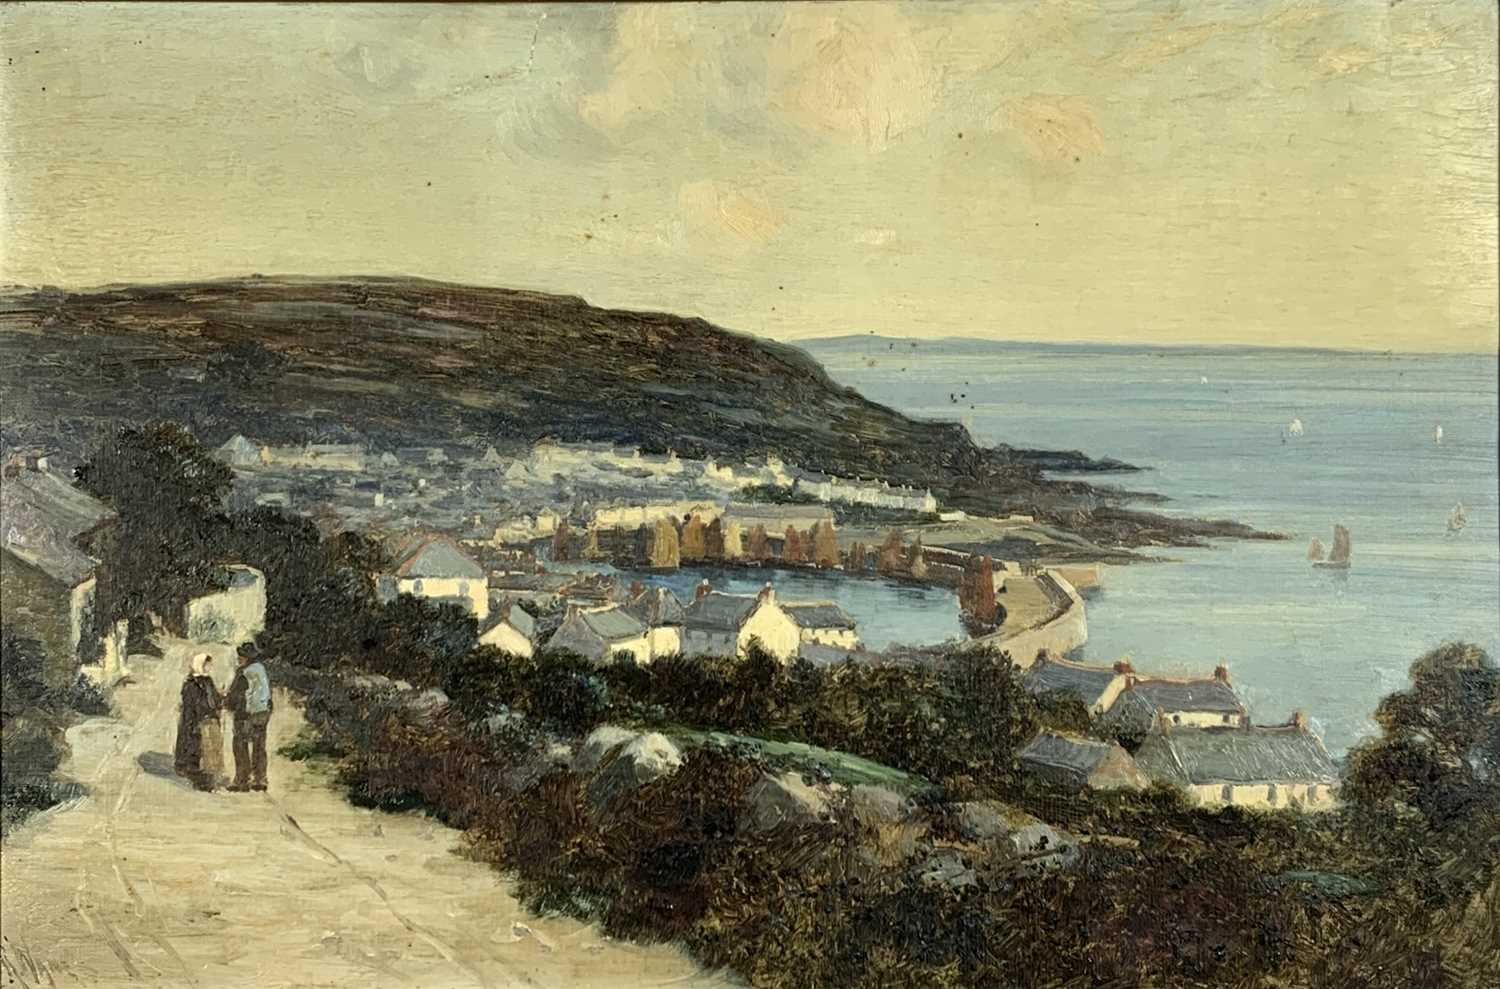 Richard WANE (1852 - 1904)A view of Mousehole Harbour from Raginnis HillOil on canvasSigned 30 x